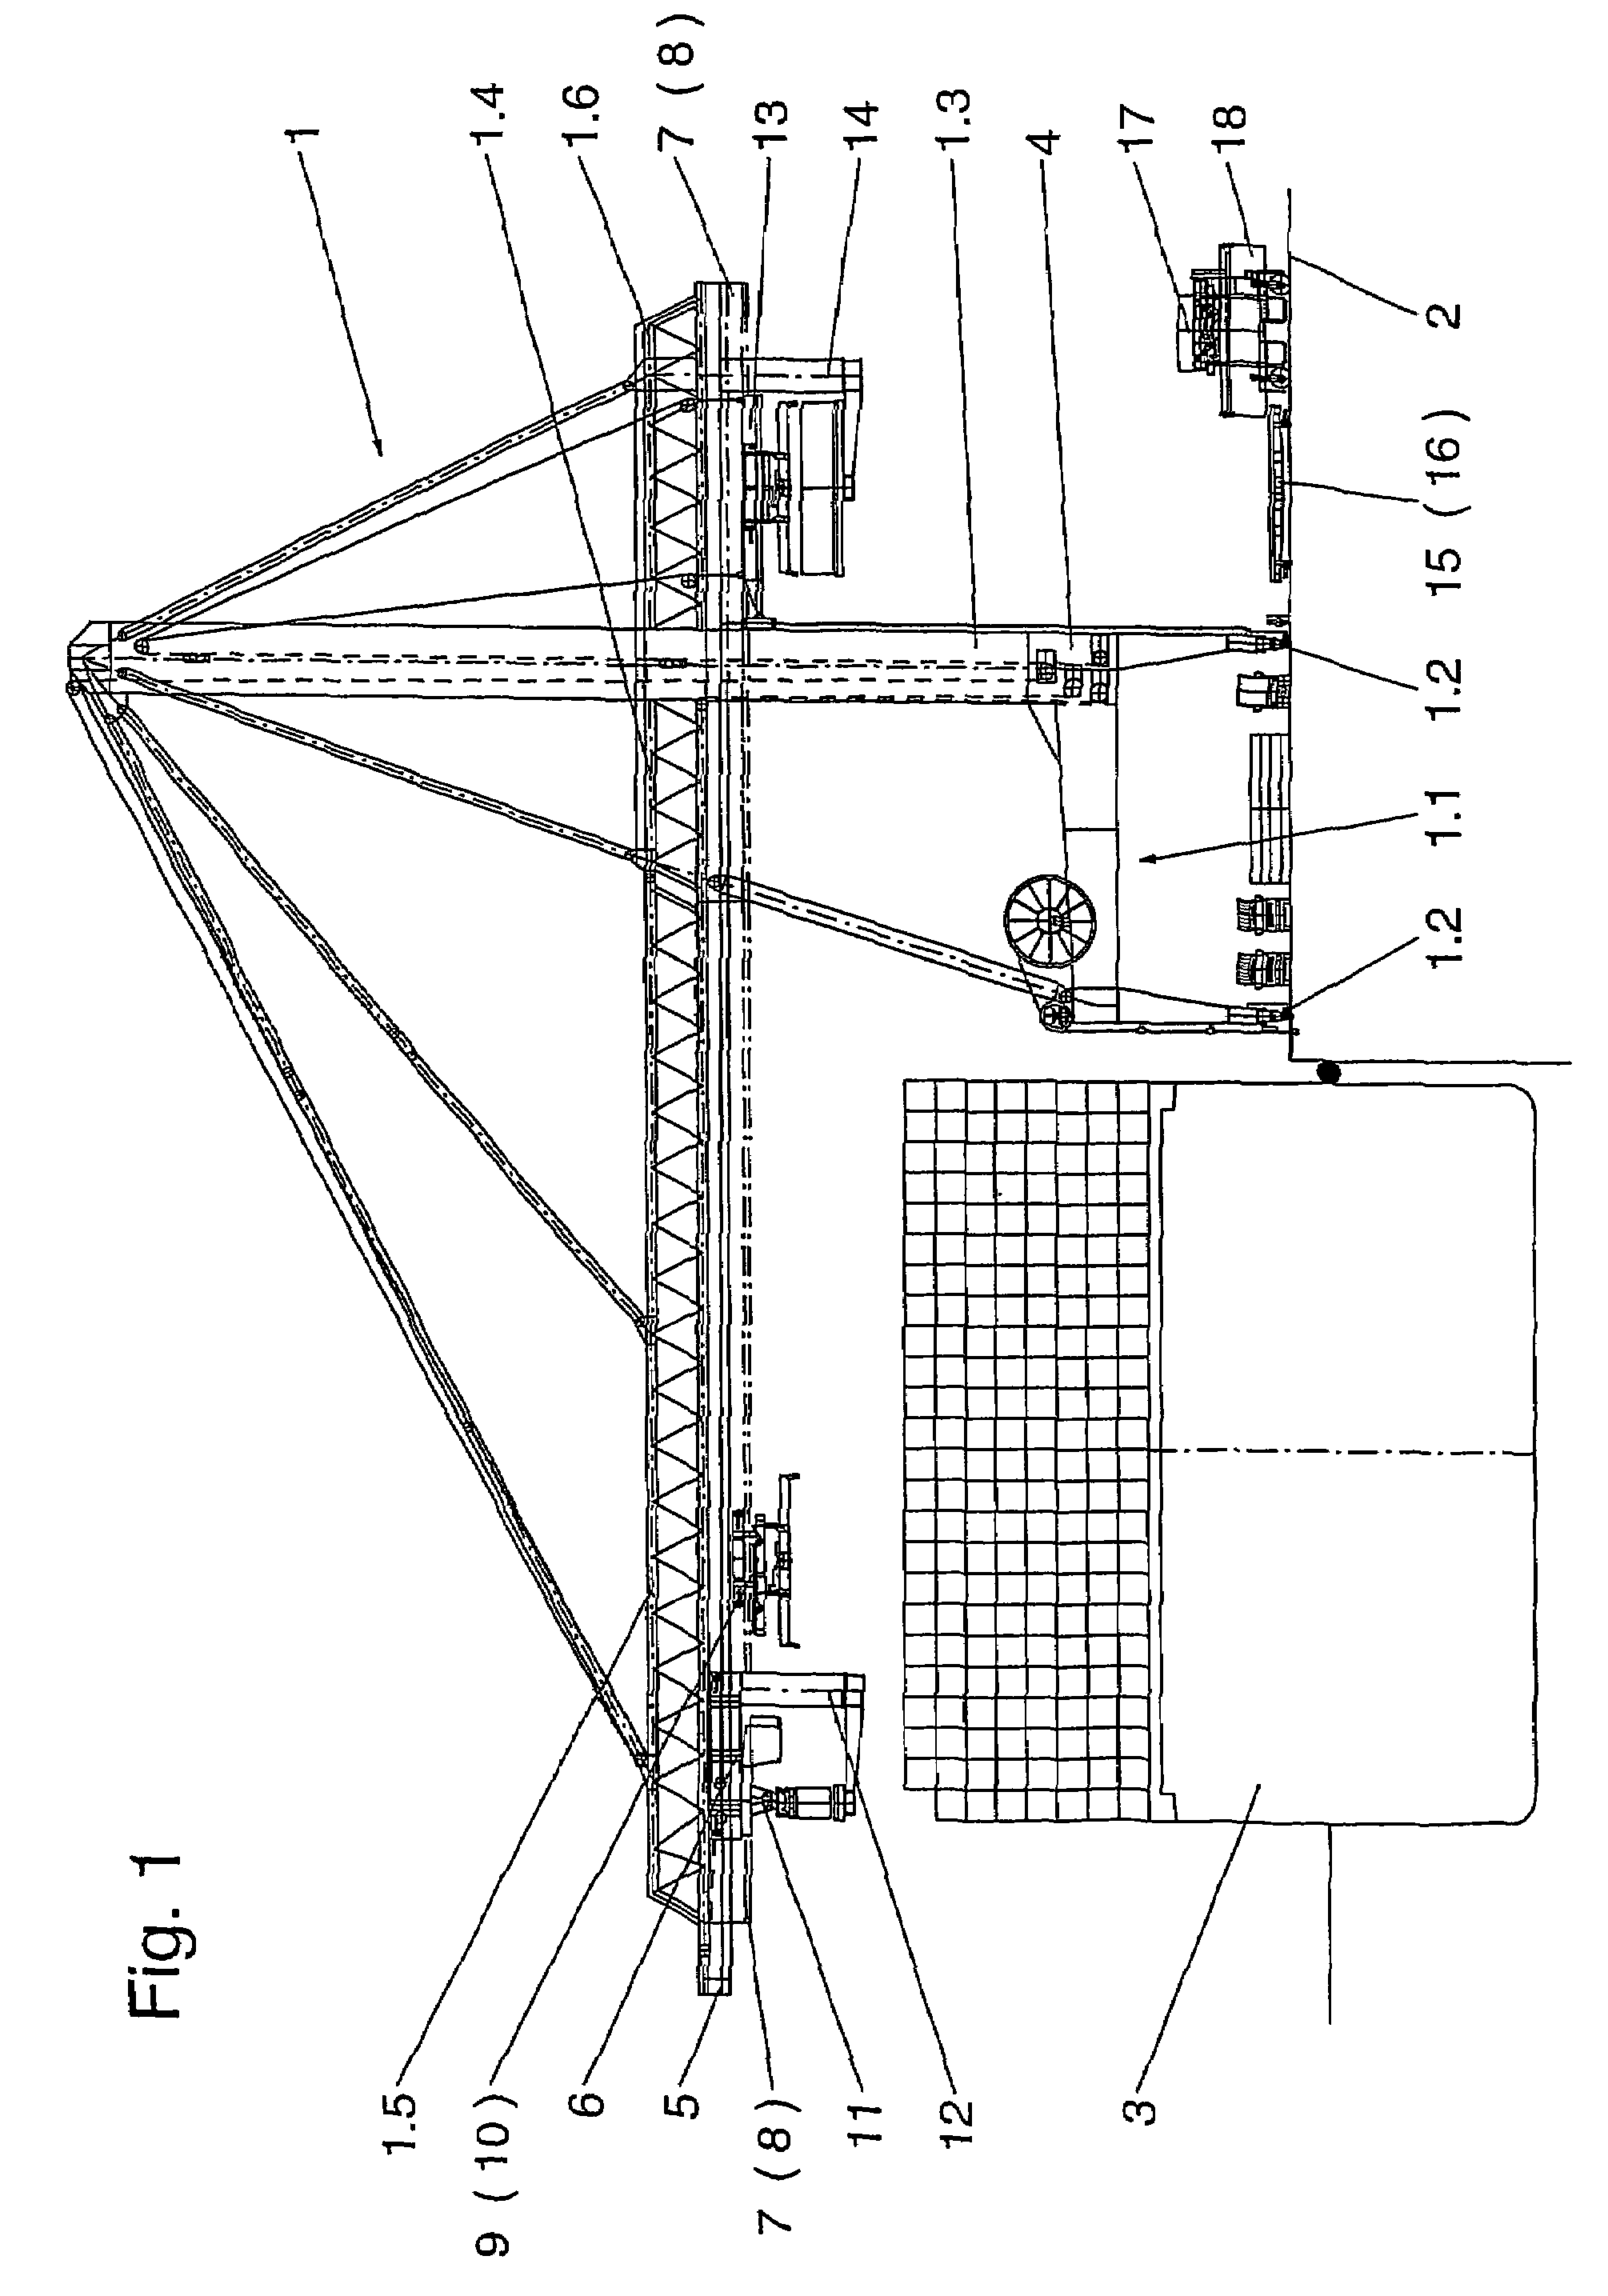 Transfer plant and method for loading and unloading containers from container ships